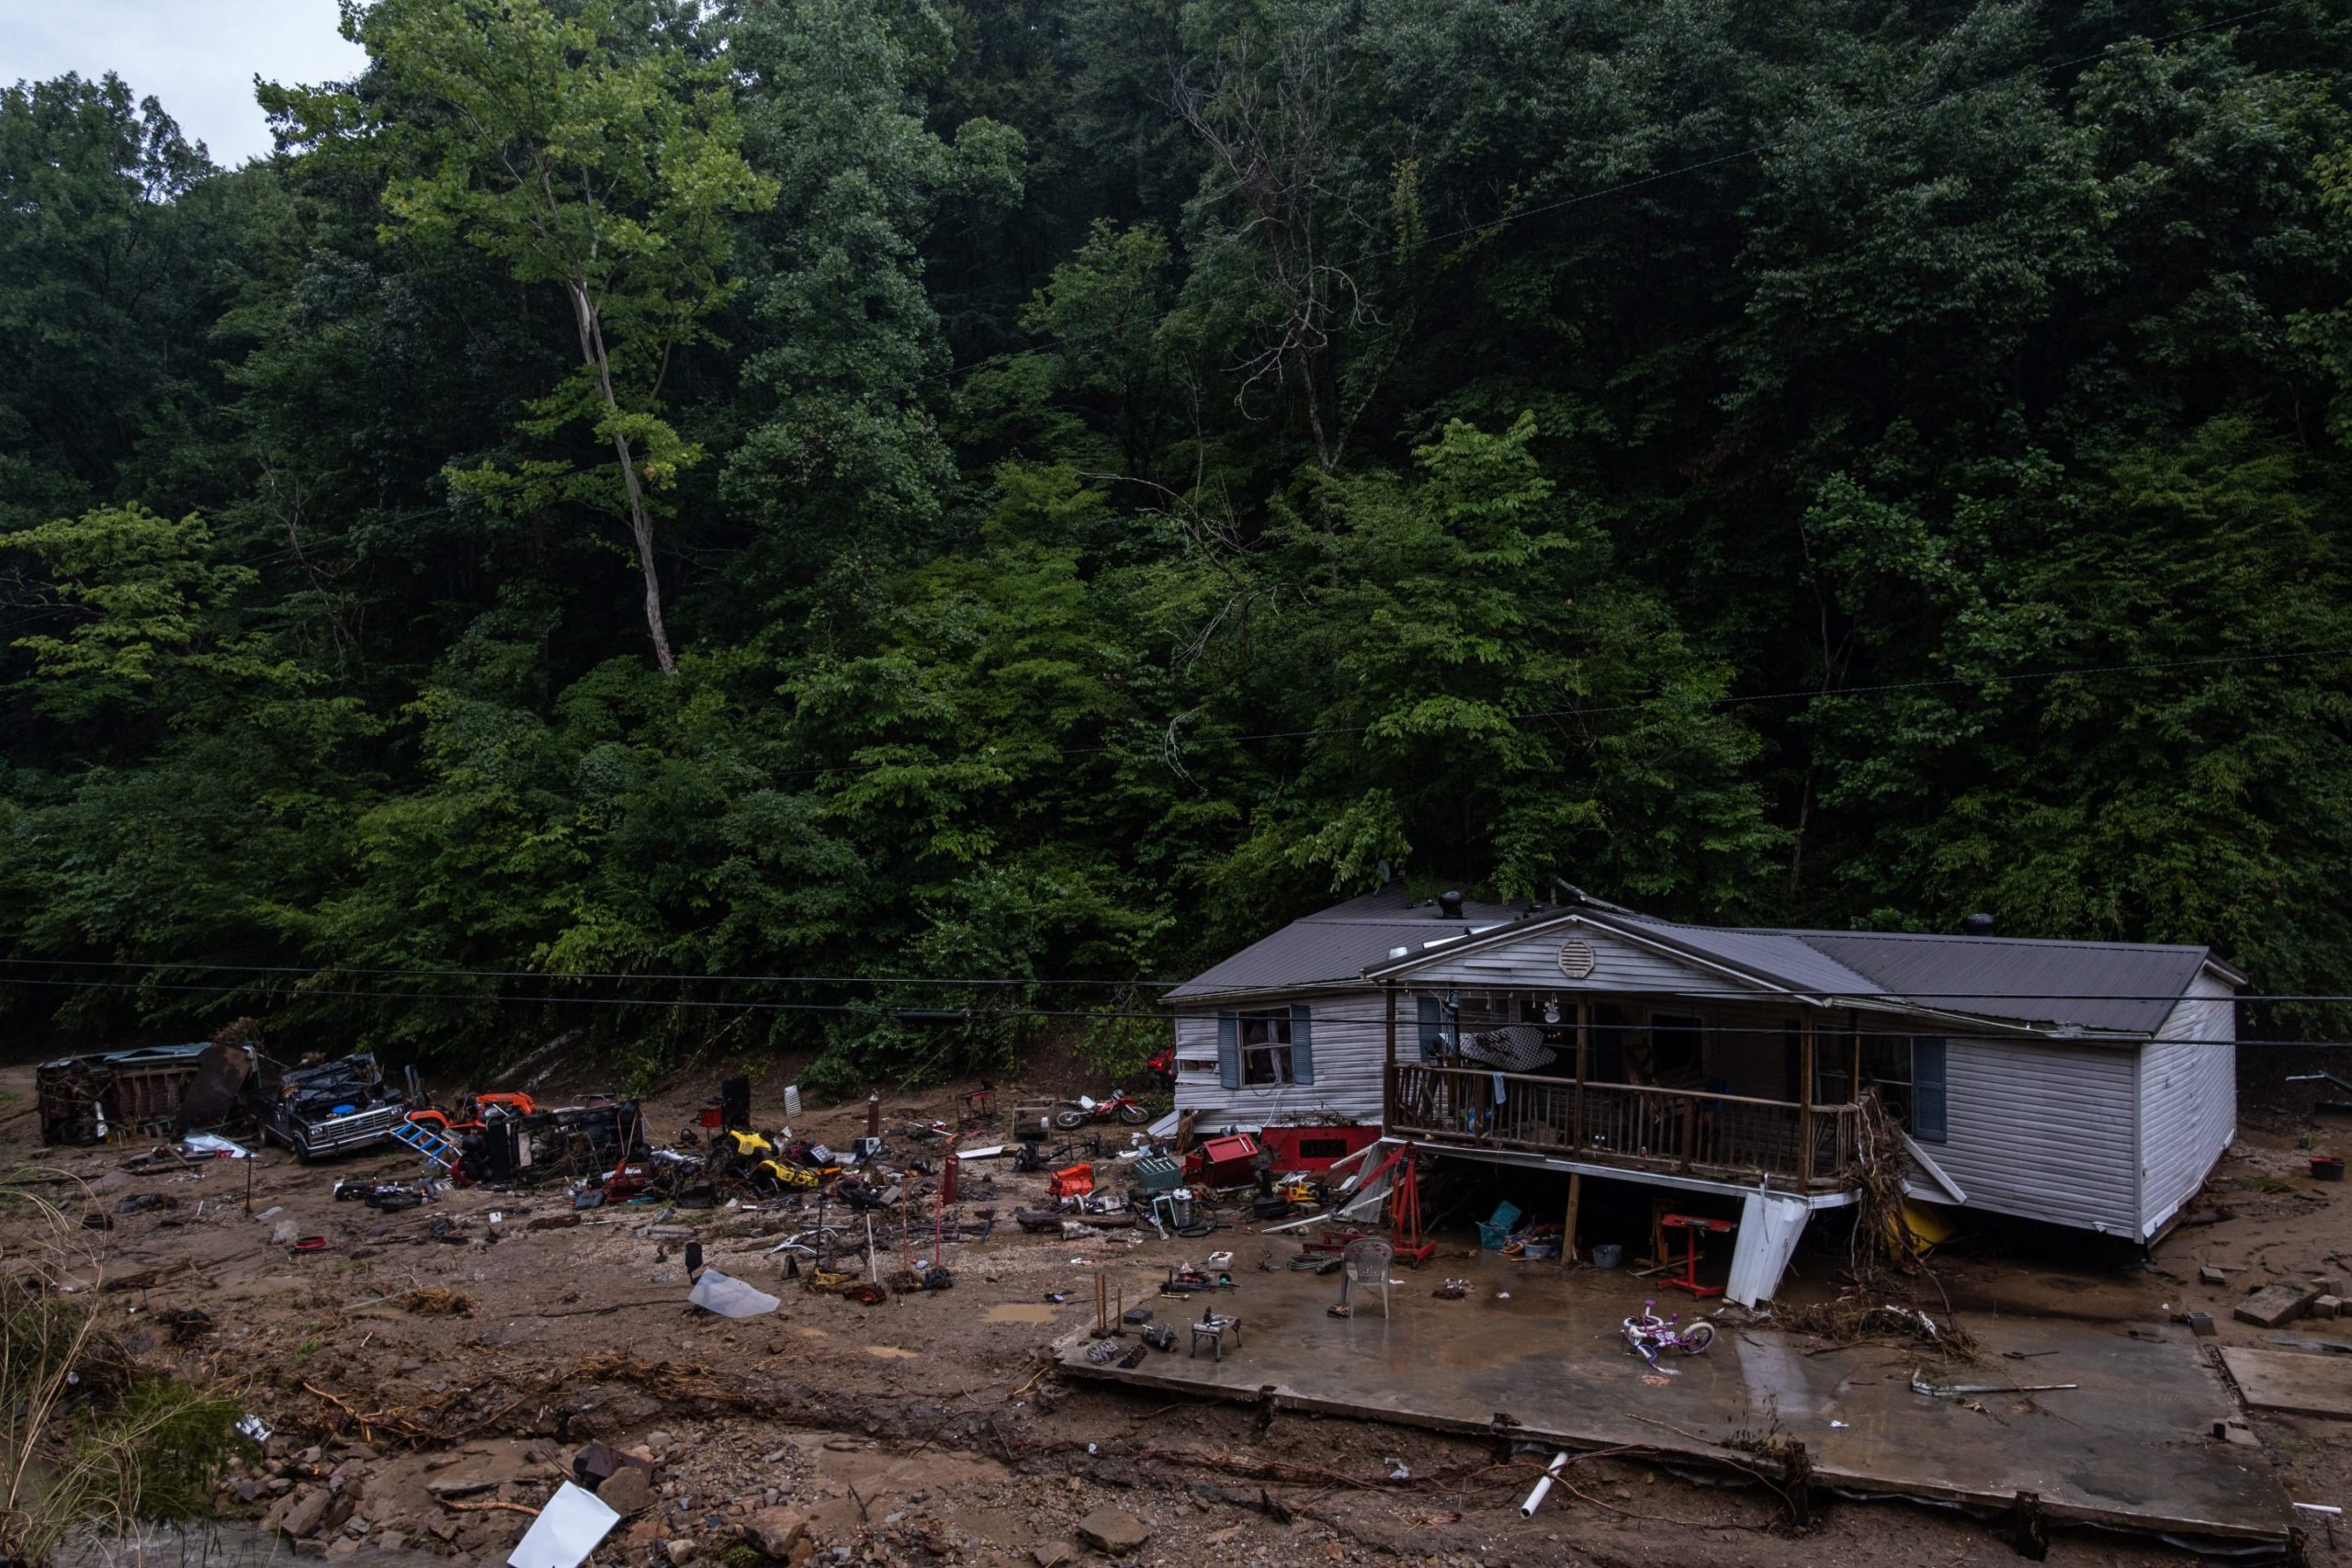 Kentucky just got hit with devastating floods. Here's how you can help